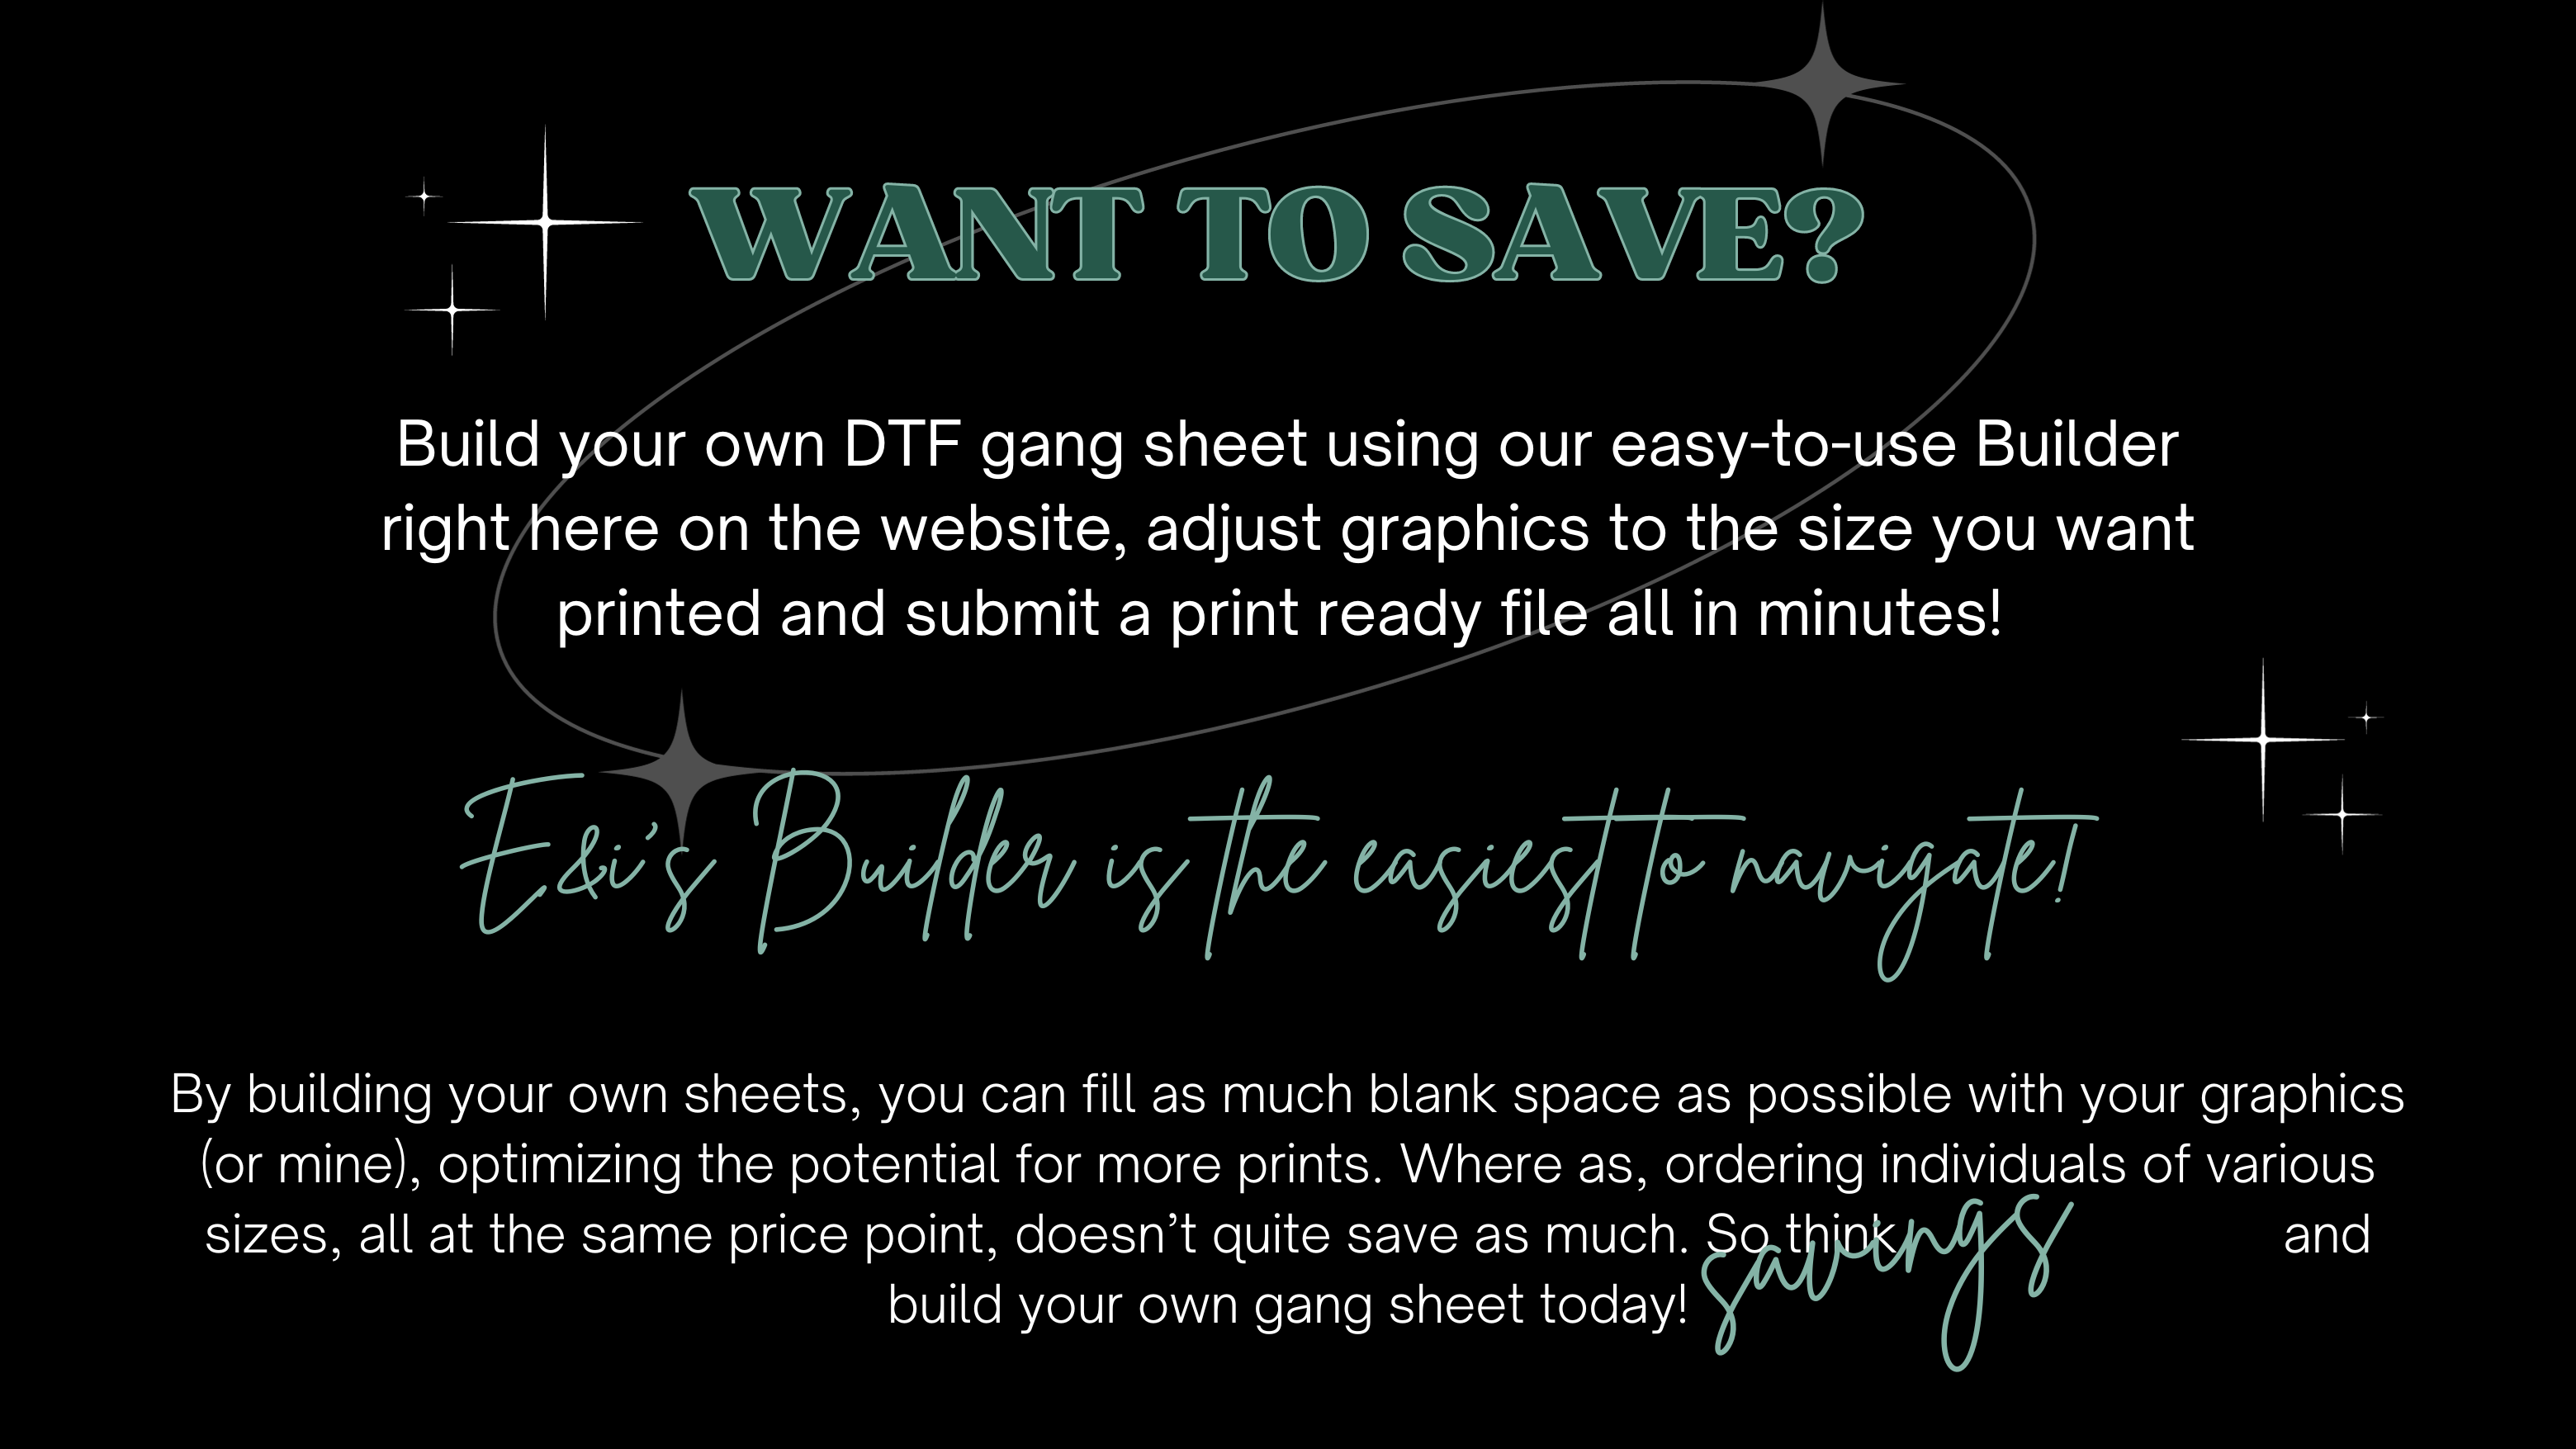 Save a great deal by building your own DTF gang sheet today using our Builder, right here on the website. See the customs section for more details. 